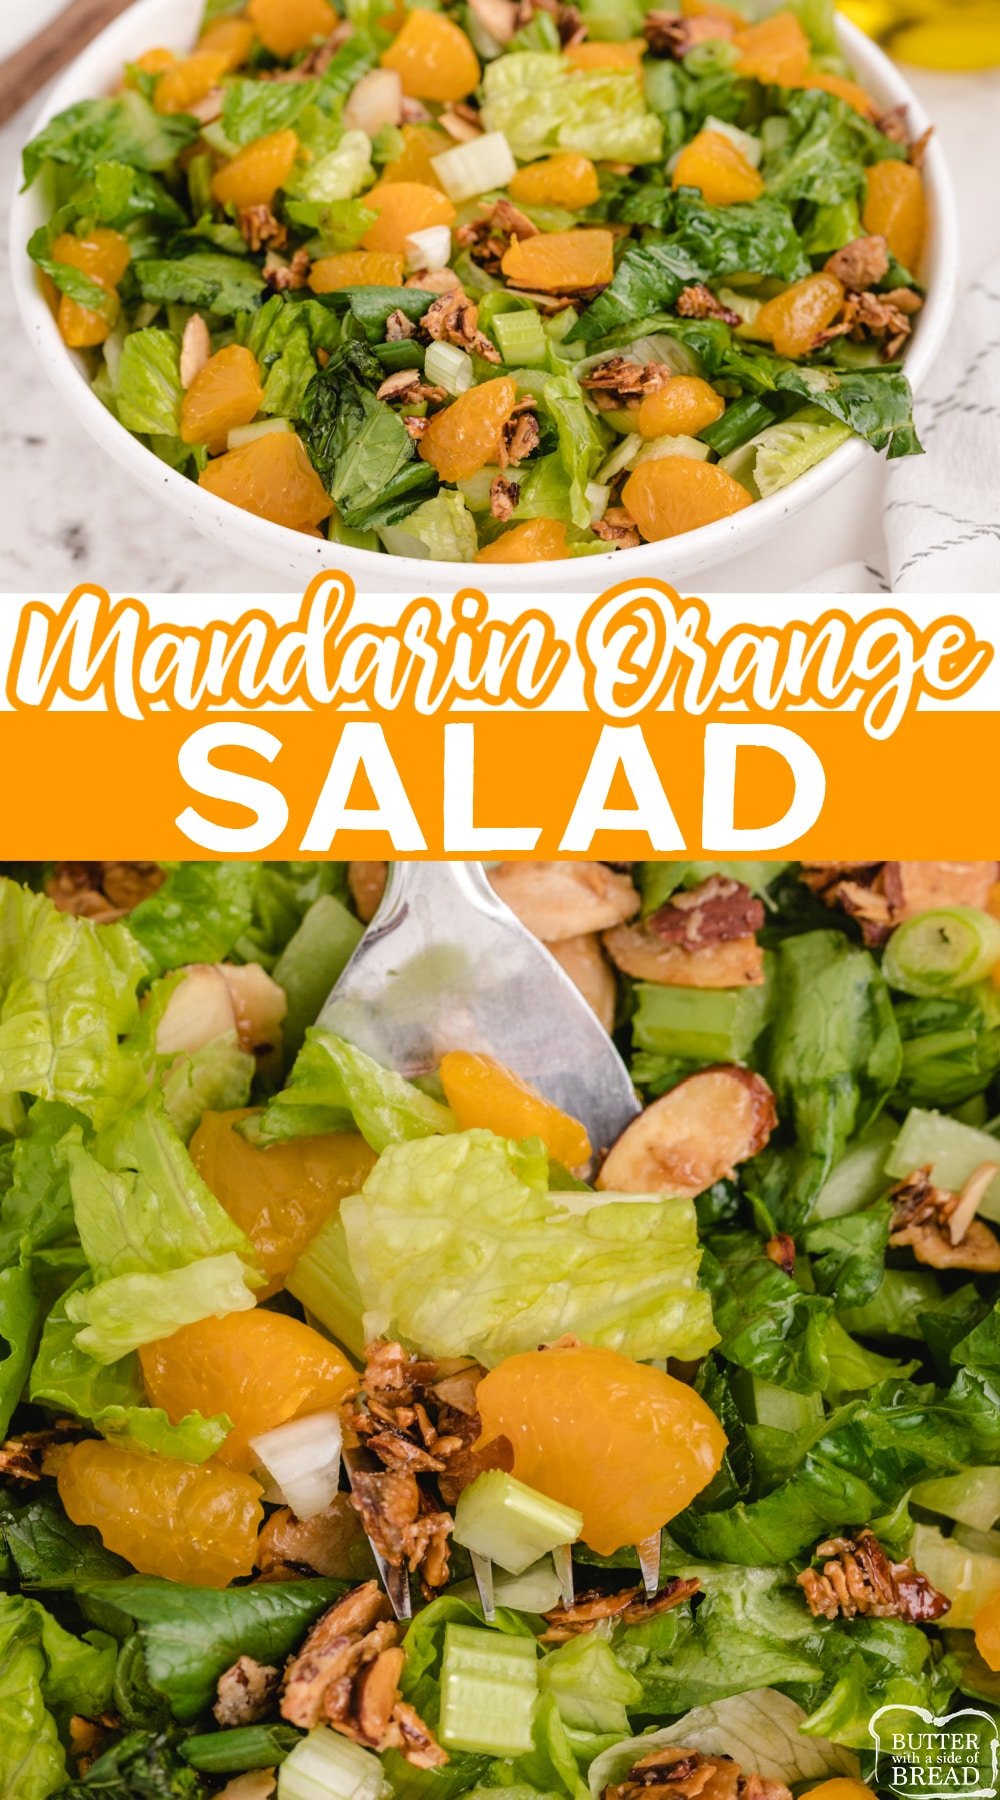 Mandarin Orange Salad made with lettuce, almonds, mandarin oranges and a simple, sweet homemade salad dressing. Easy to make and pretty enough to take to a dinner party!